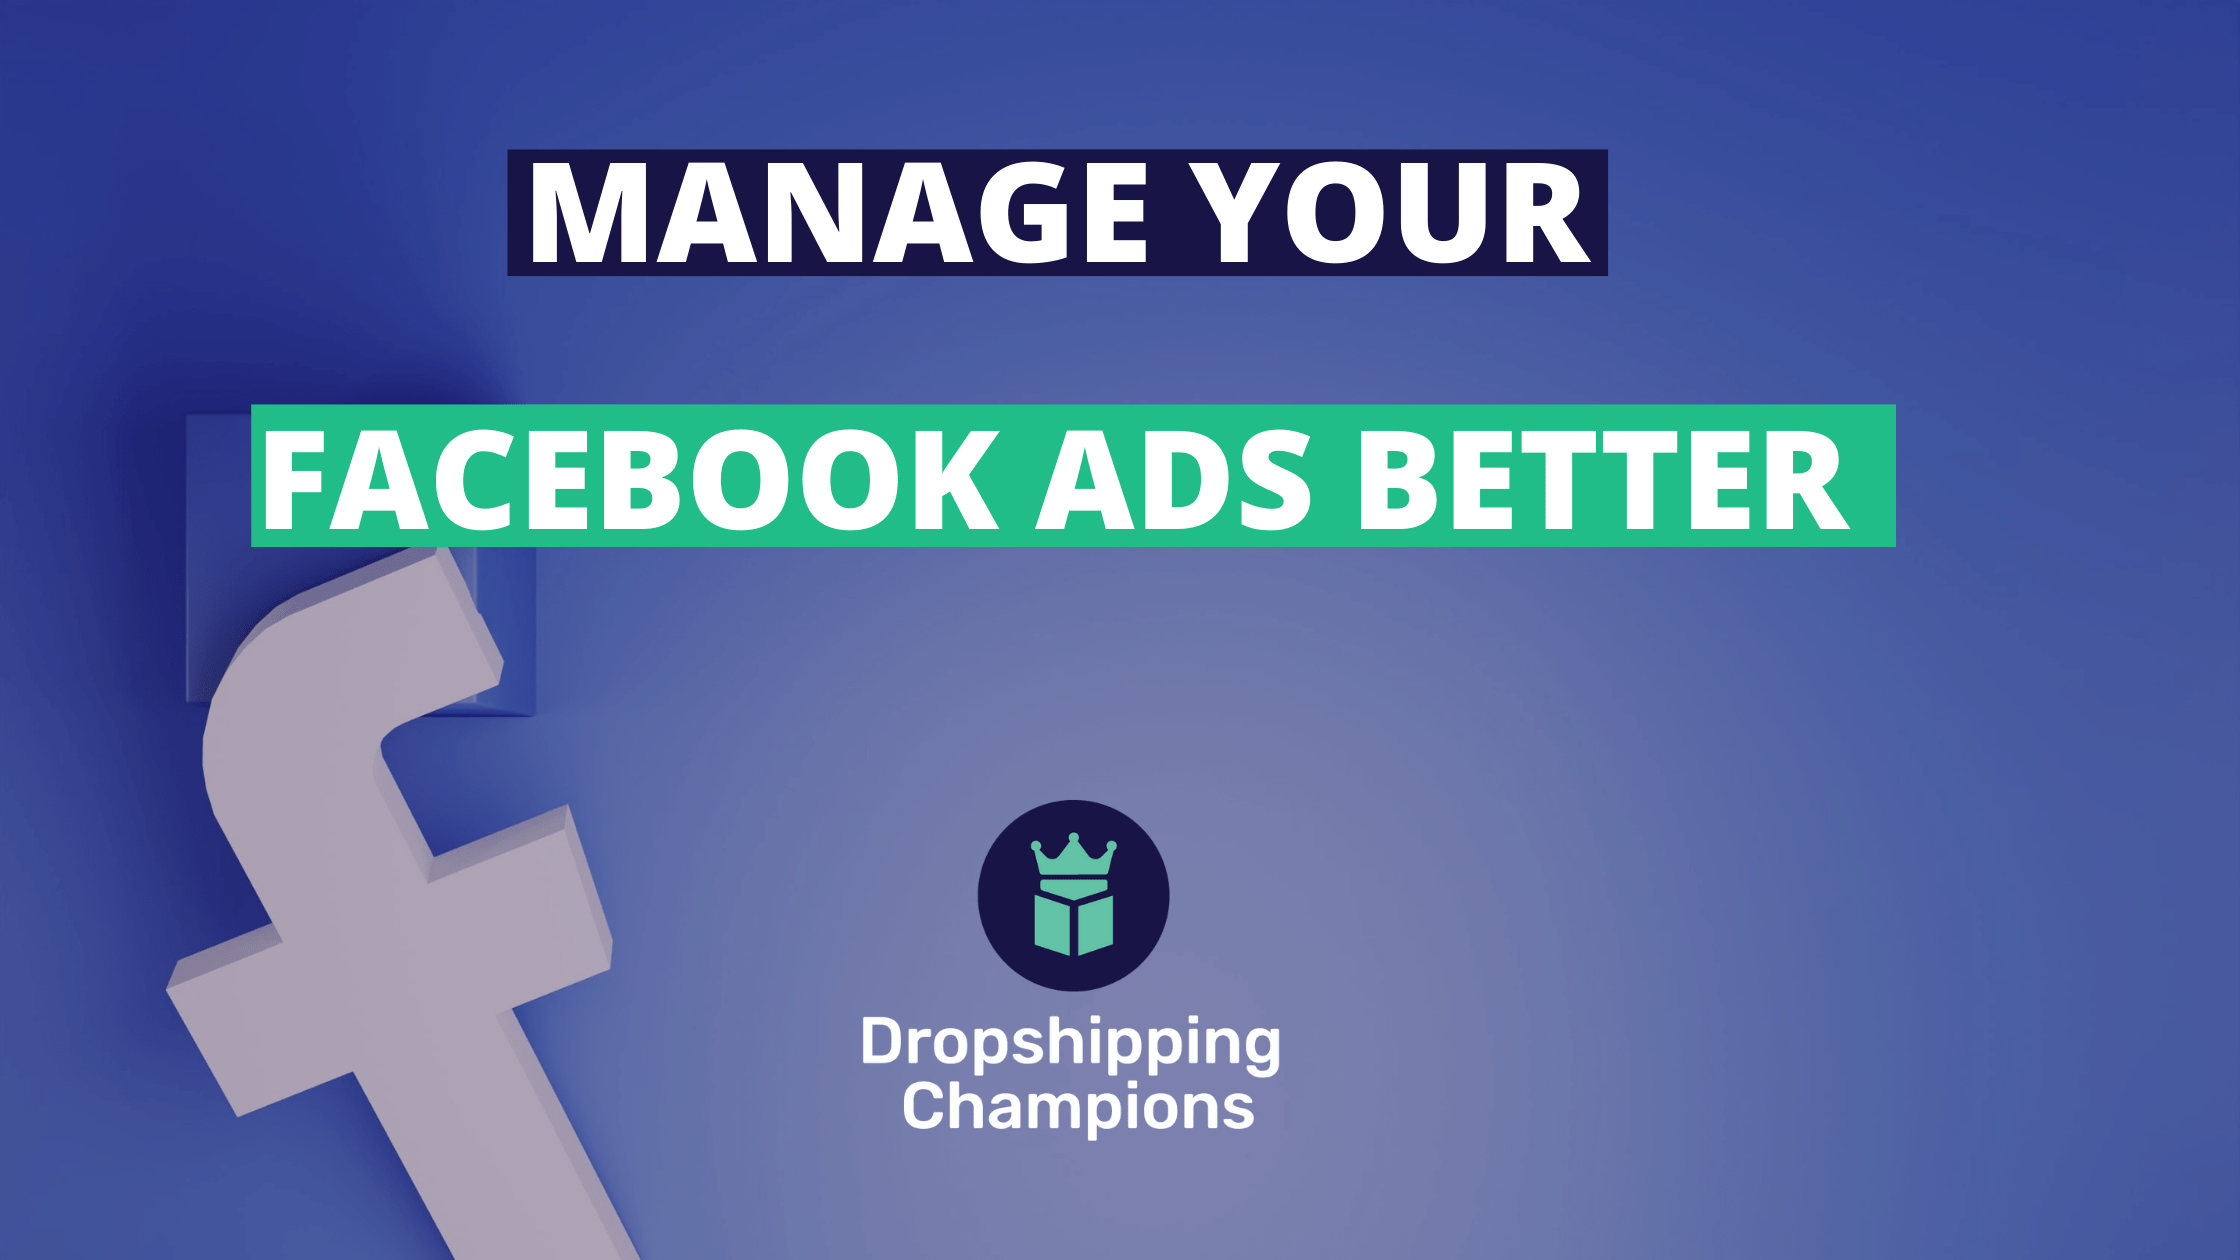 How to better manage Facebook ads?